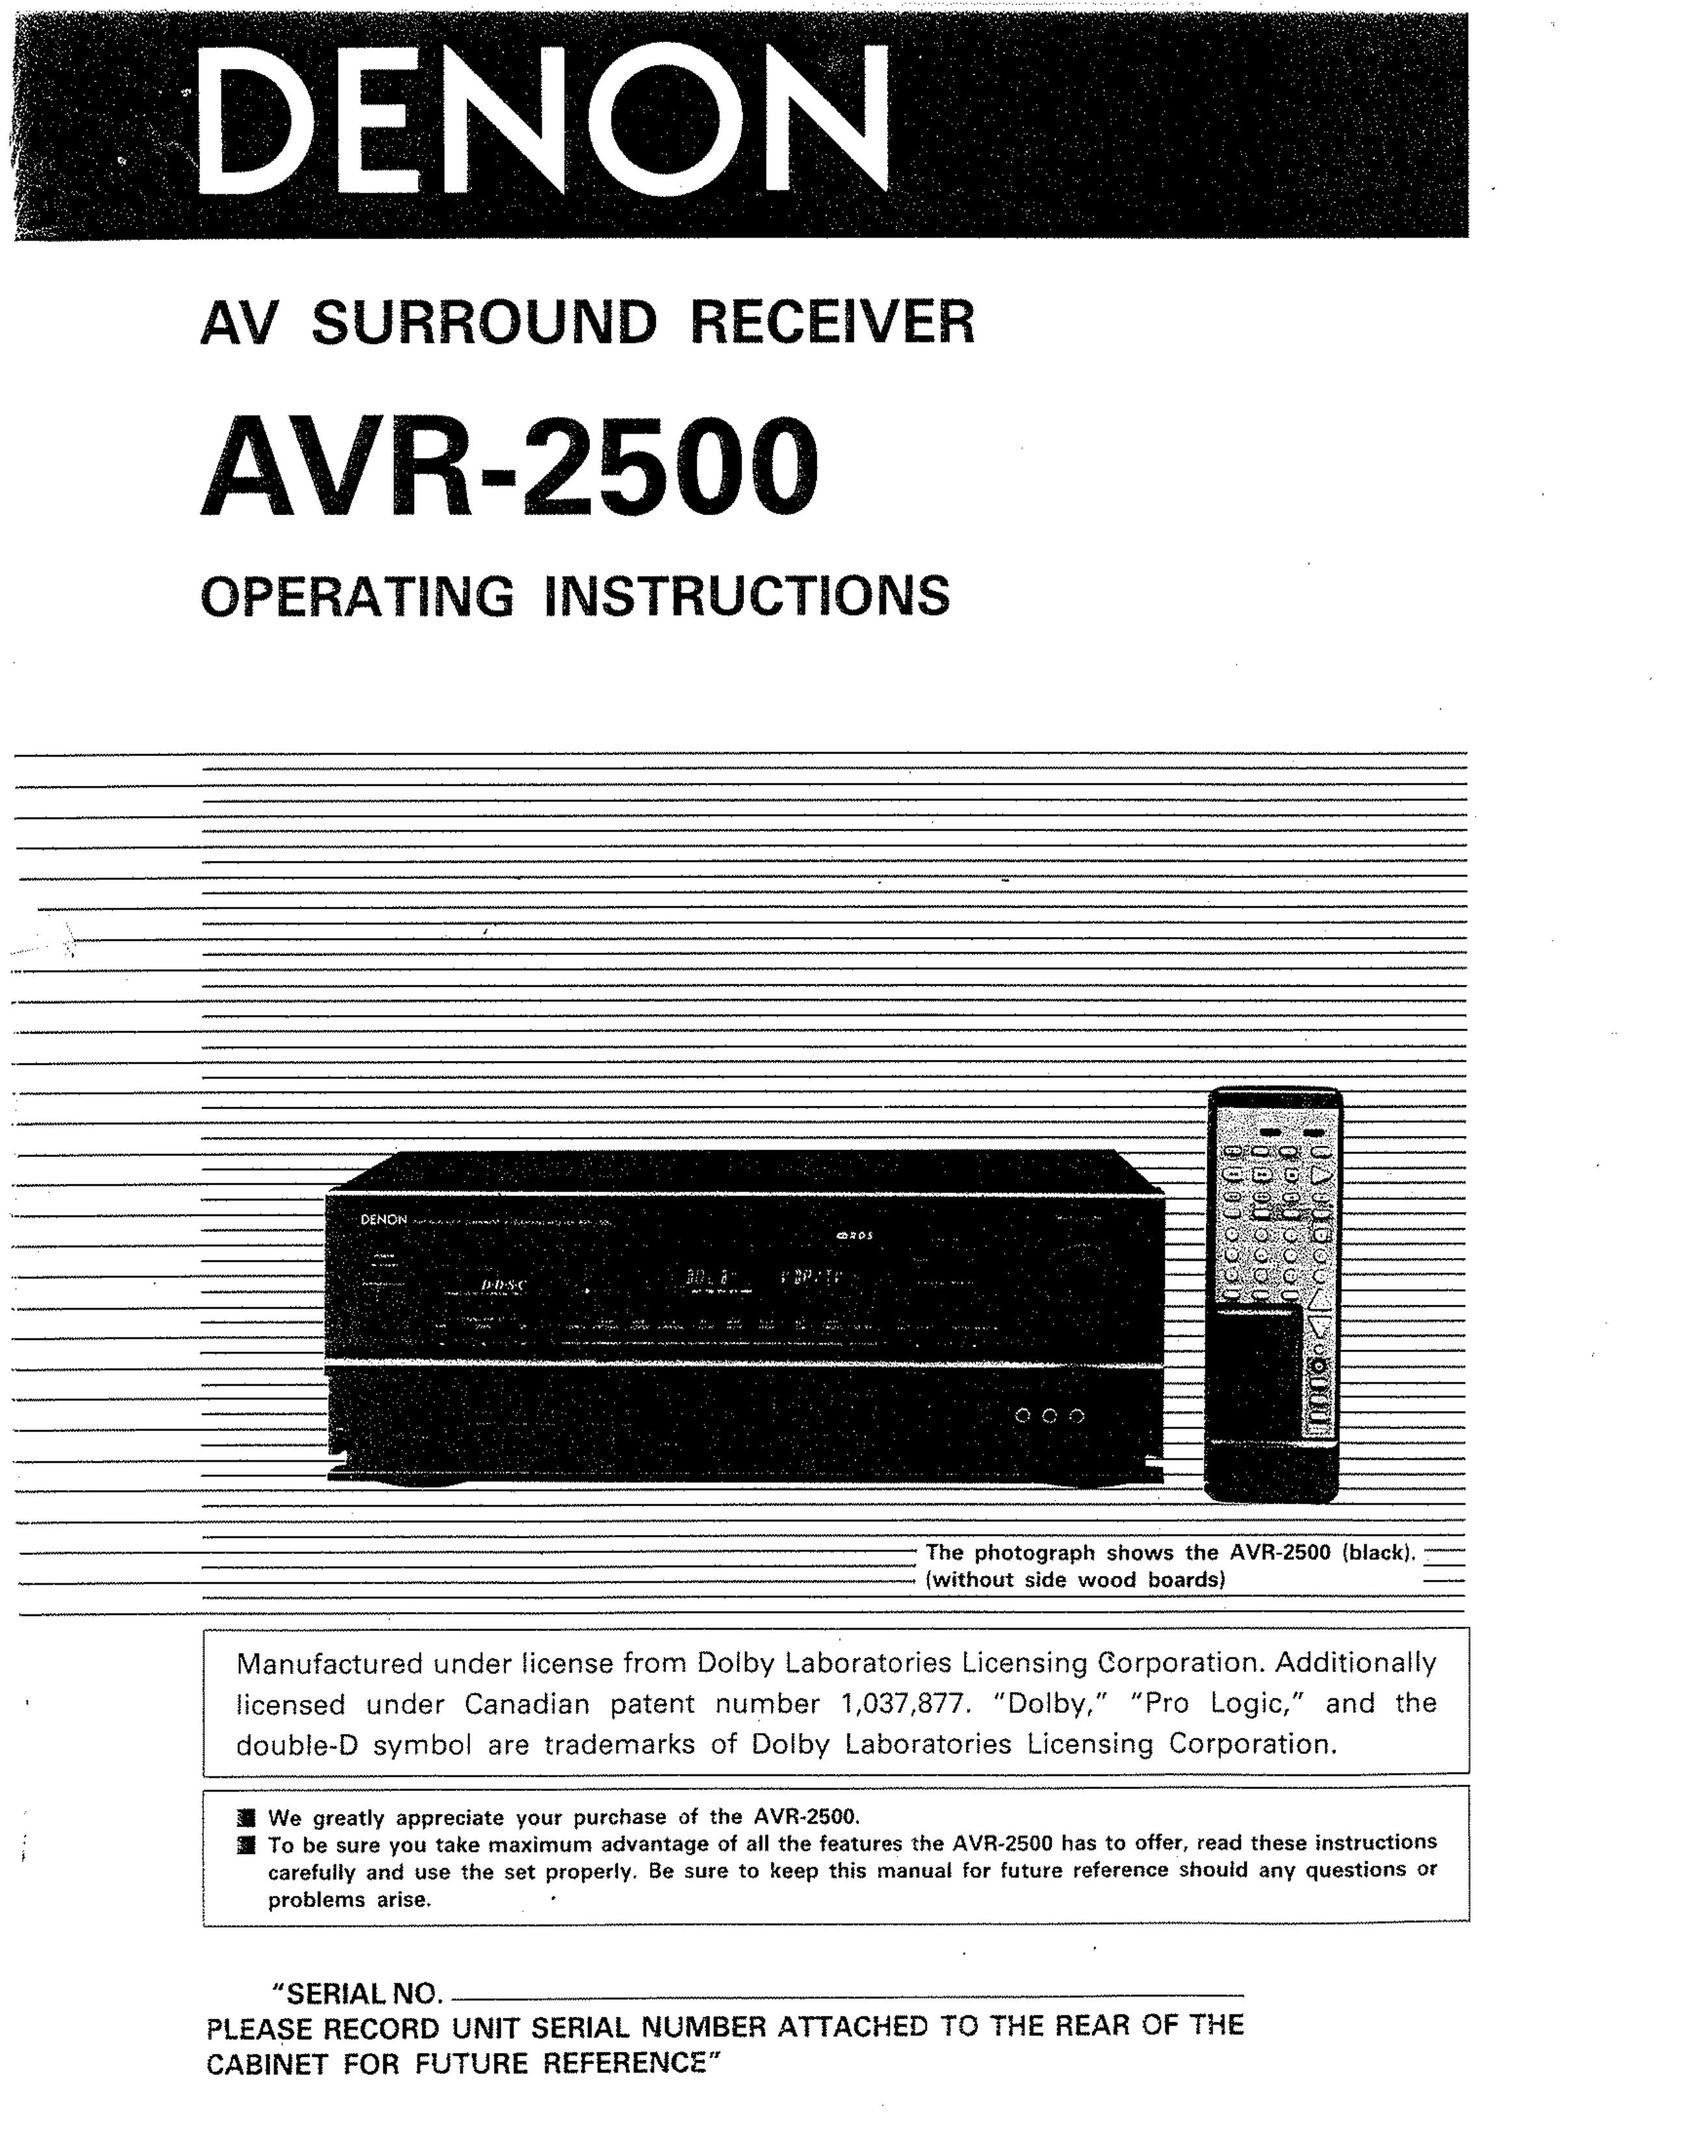 Denon AVR-2500 Home Theater System User Manual